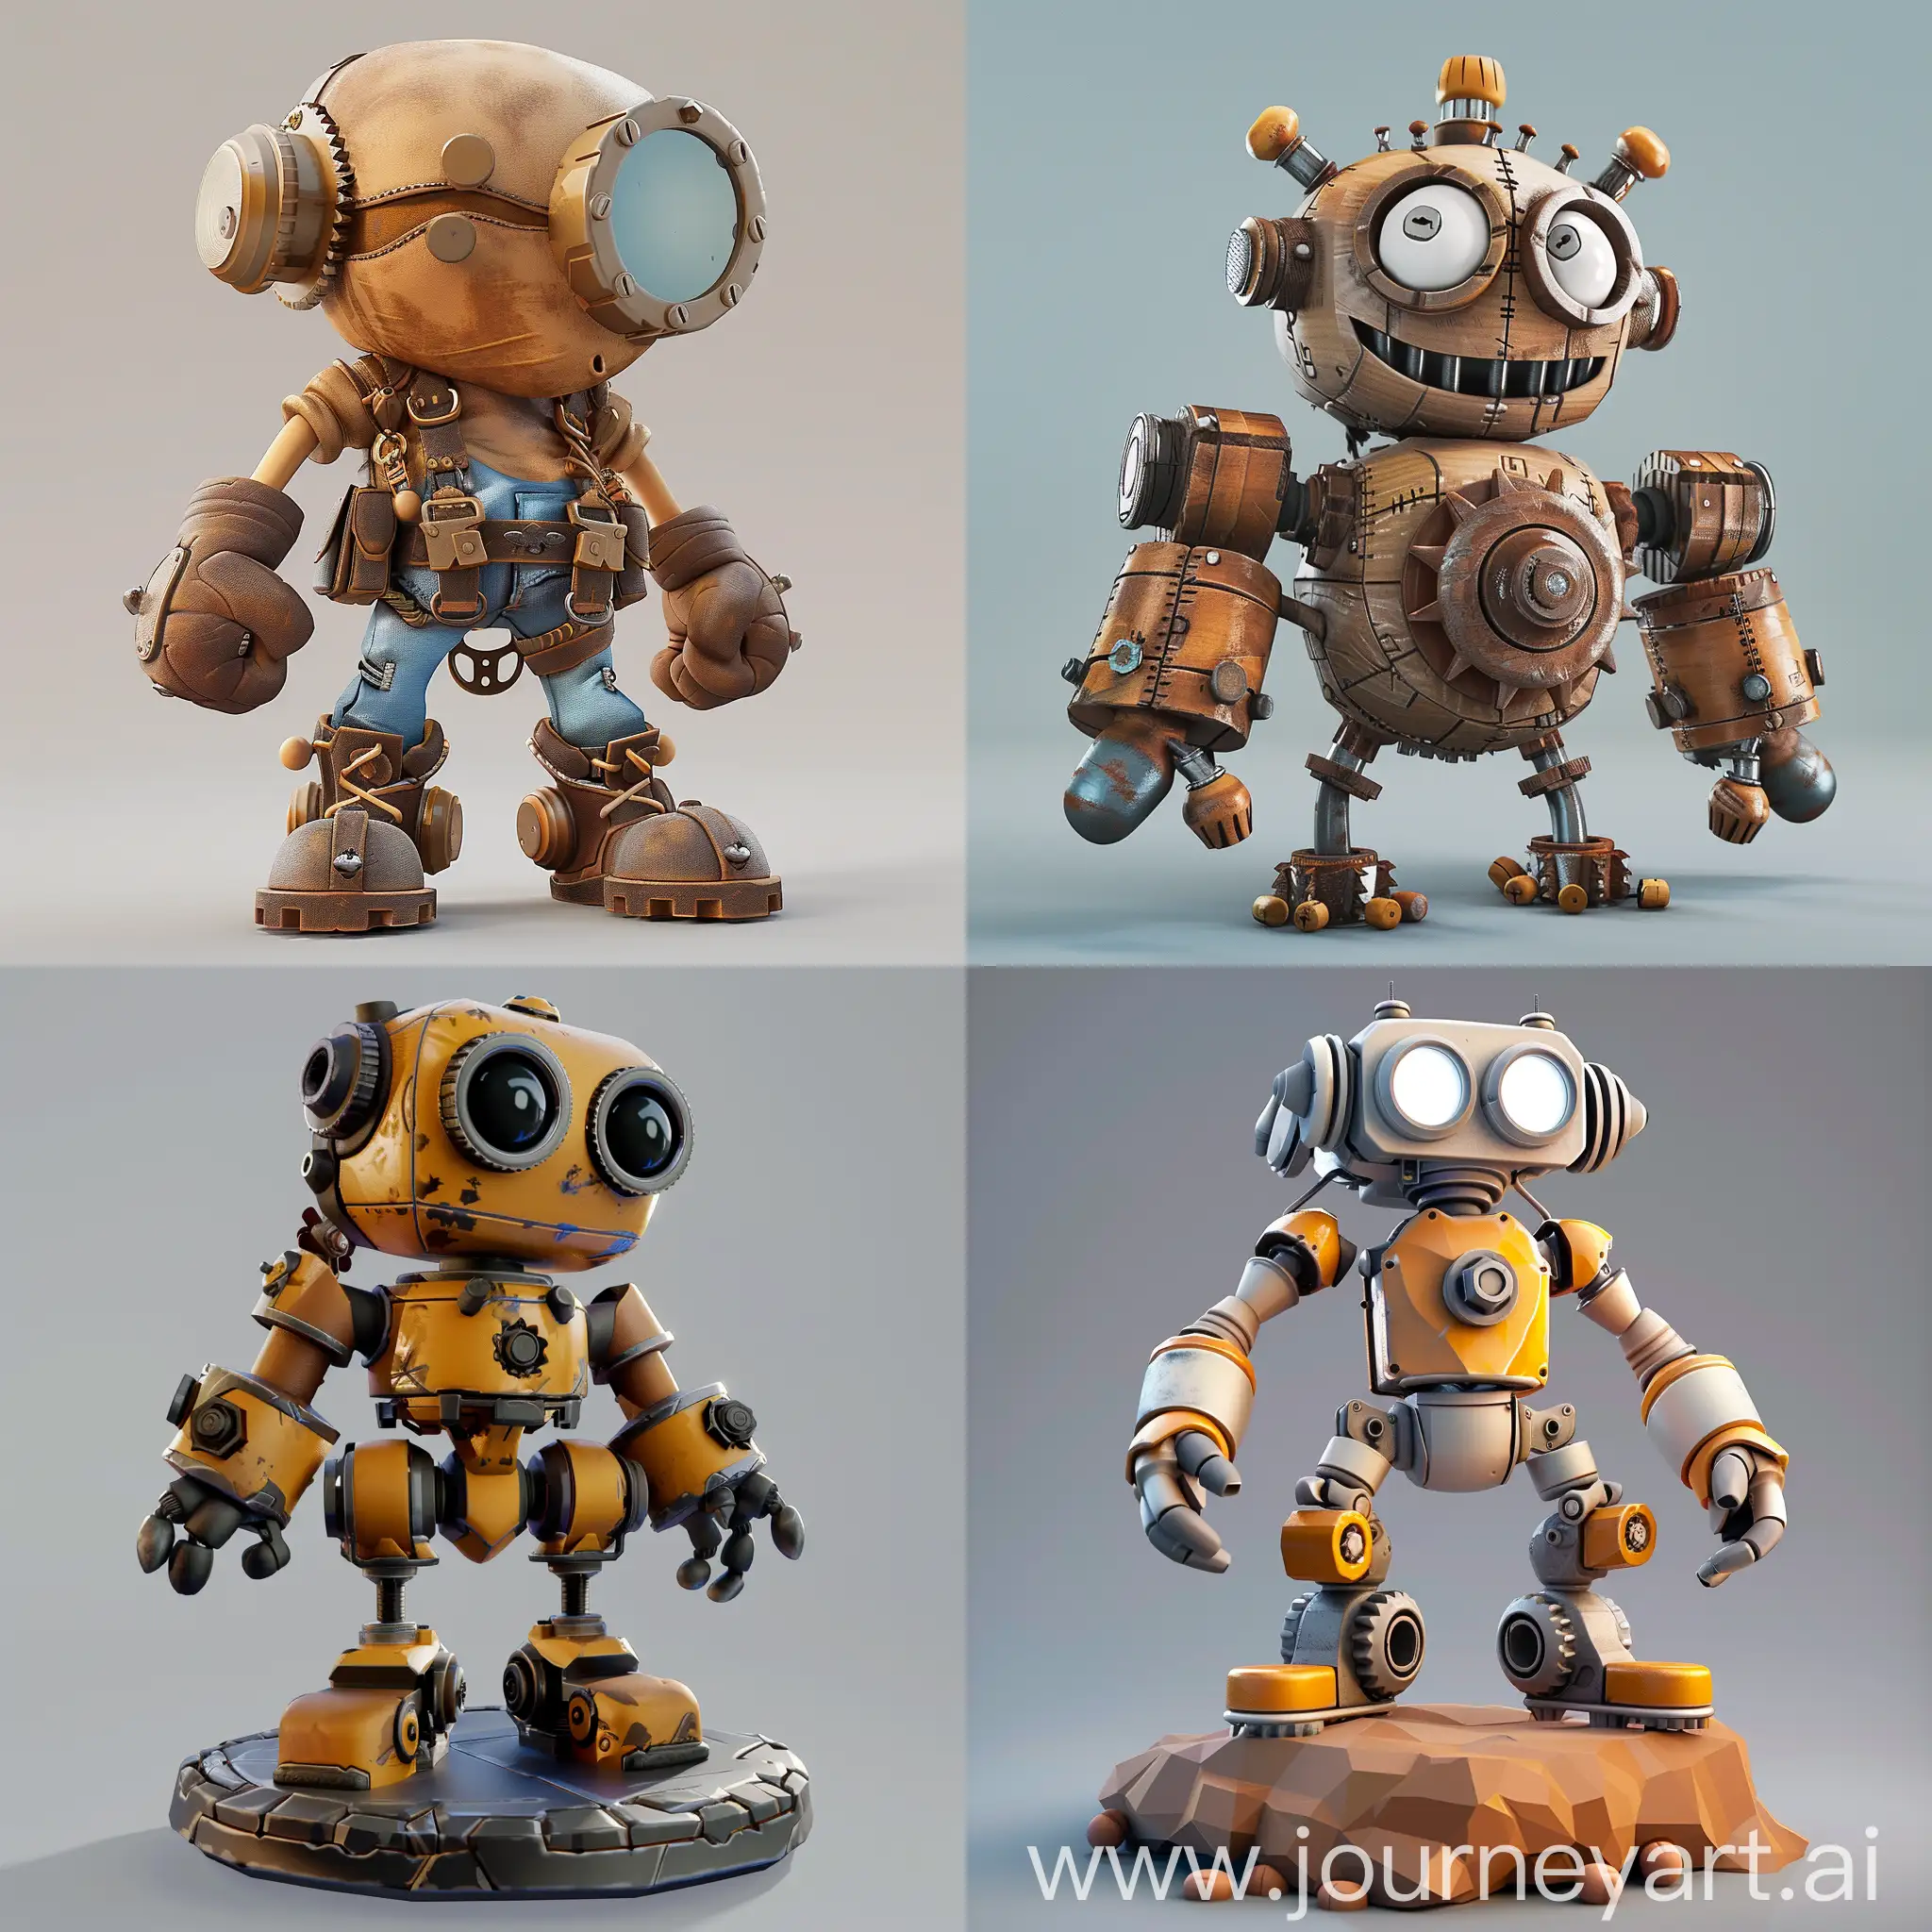 Mechanical-Characters-for-Platformer-Game-3D-Gears-and-Nuts-Creations